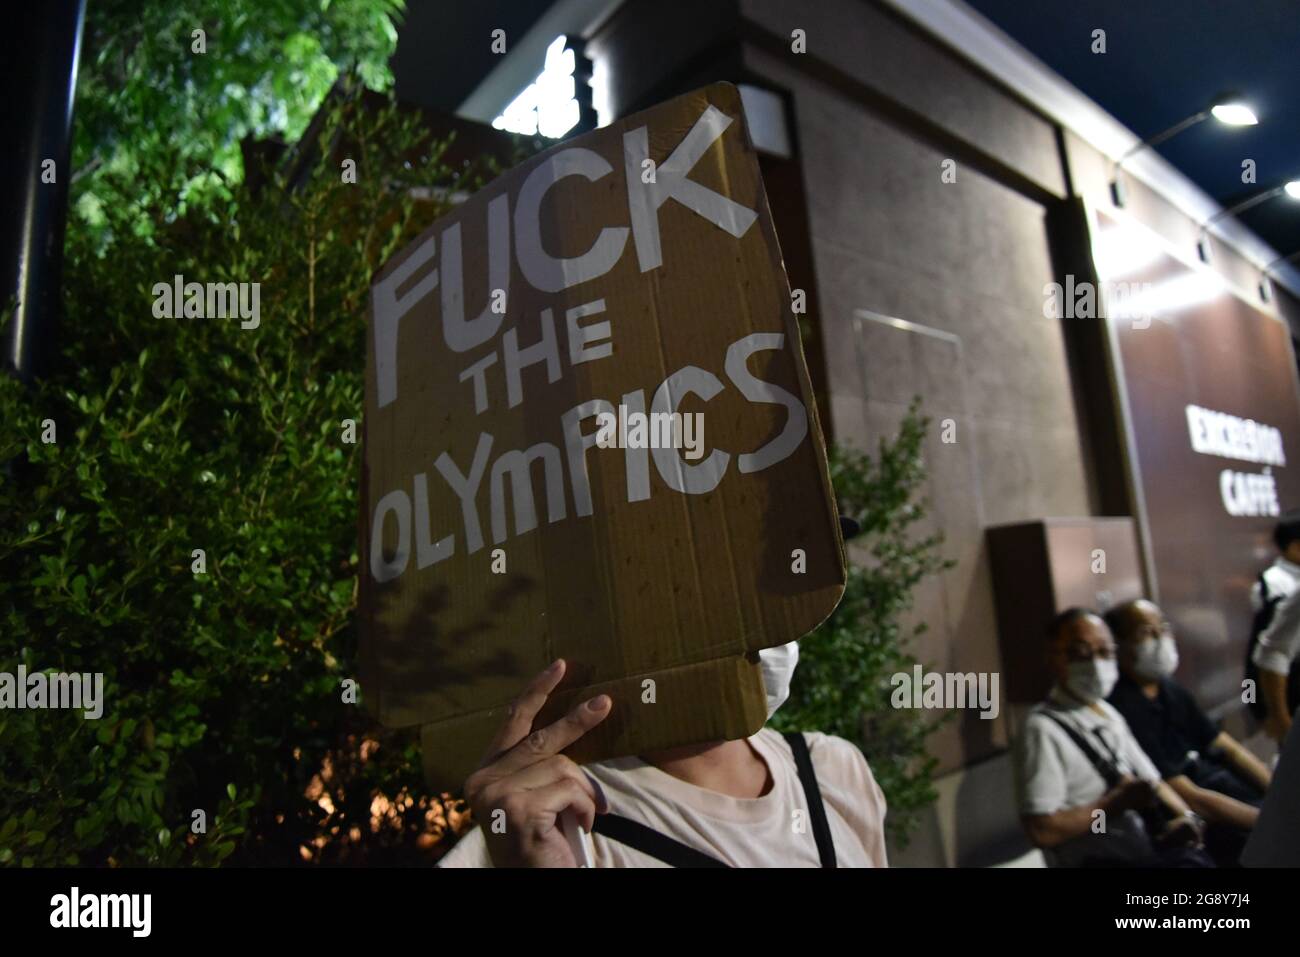 Tokyo, Japan - July 23, 2021 : Protester Holding a poster, a demonstration to stop Tokyo Olympics 2020 due to coronavirus emergency Stock Photo